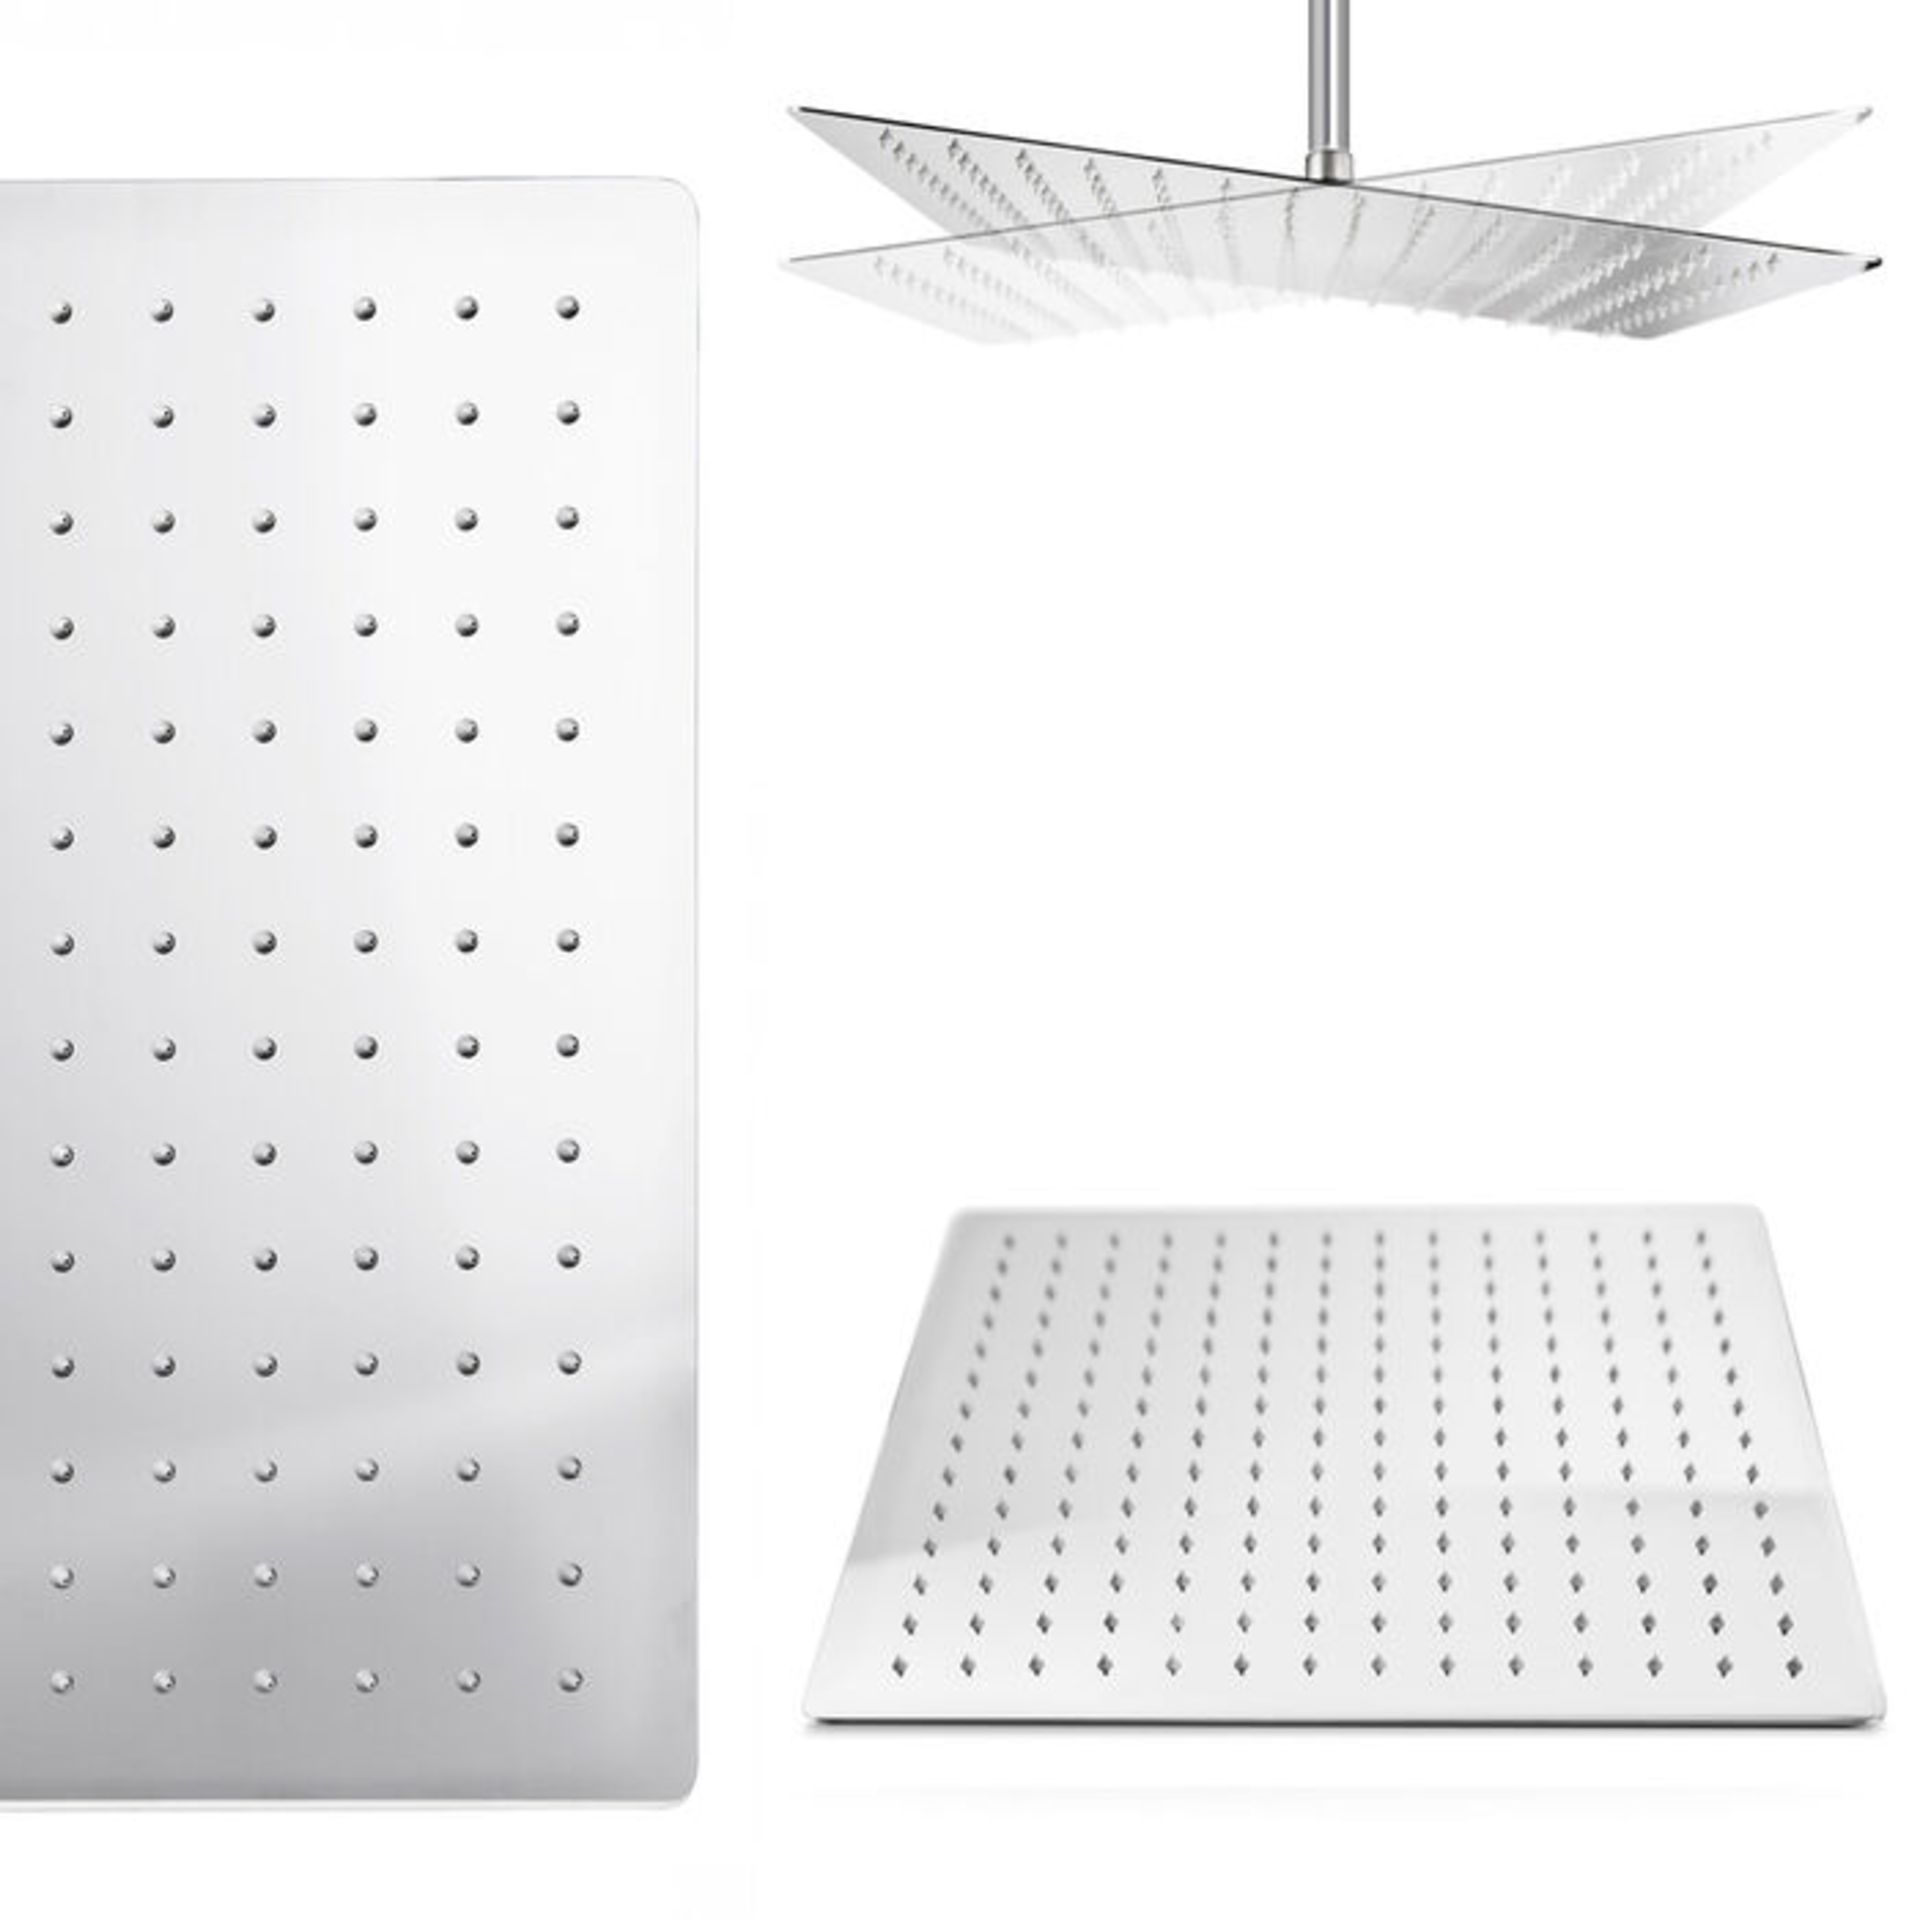 (E1032) Stainless Steel 400mm Large Square Shower Head Solid metal structure Can be wall or c...